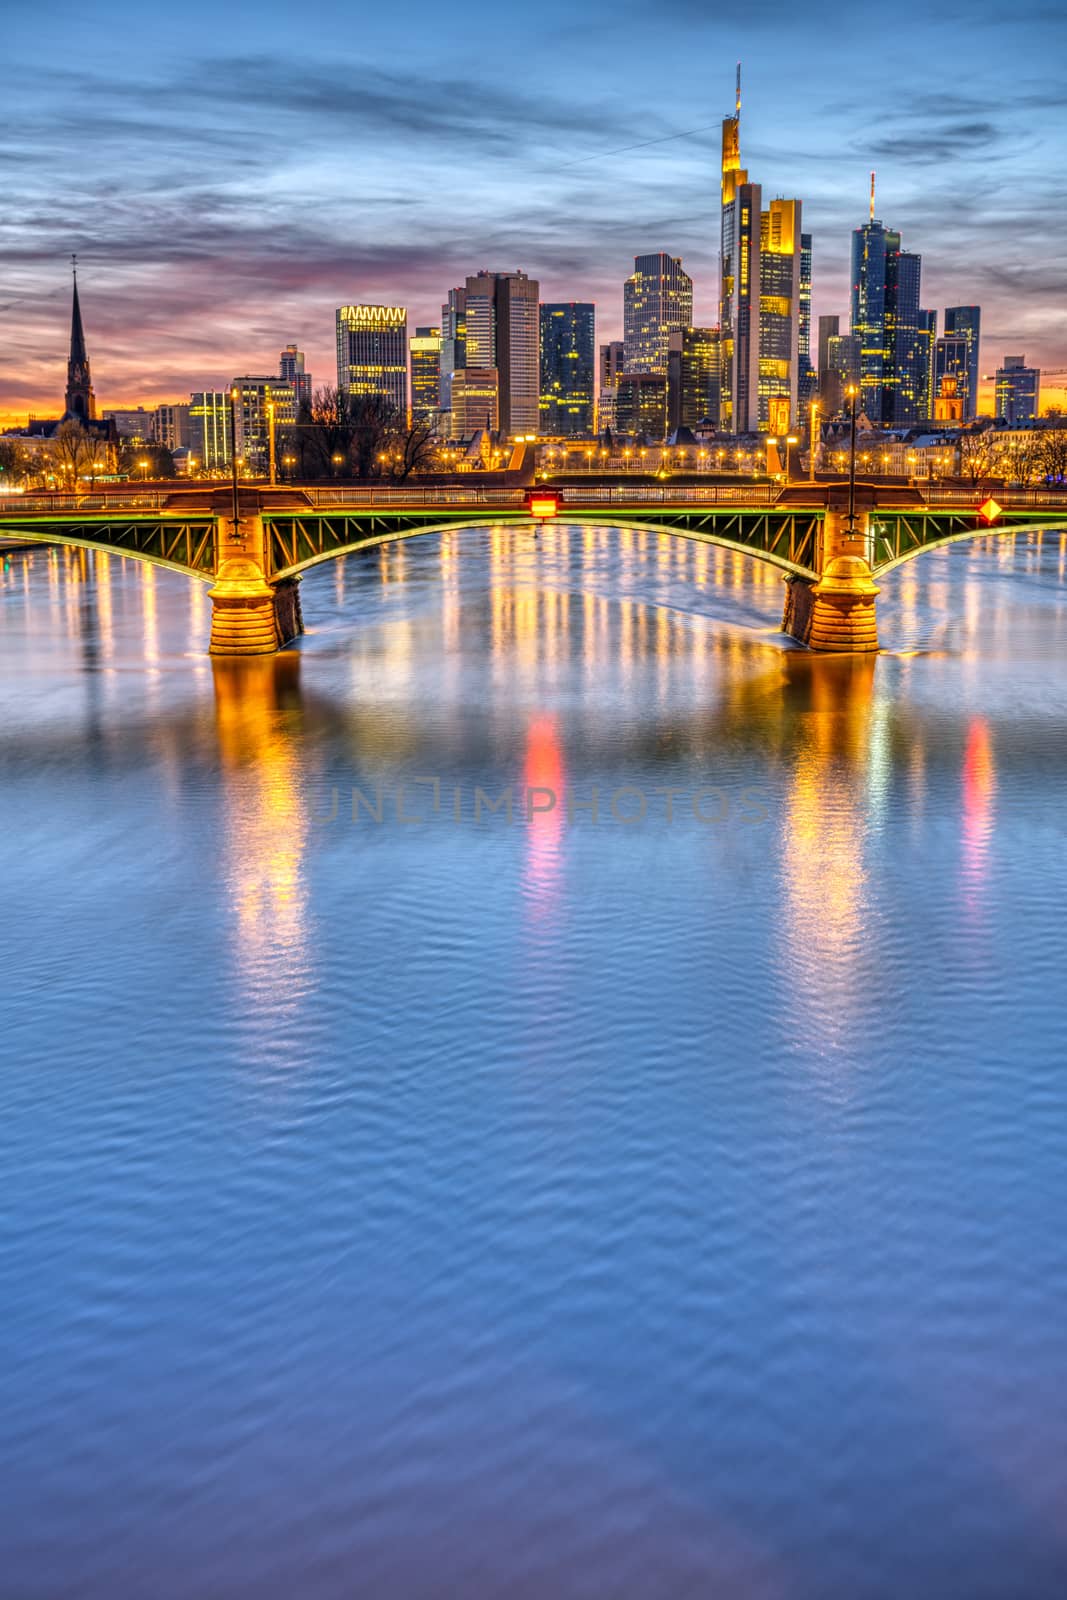 The river Main with the famous skyline of Frankfurt after sunset